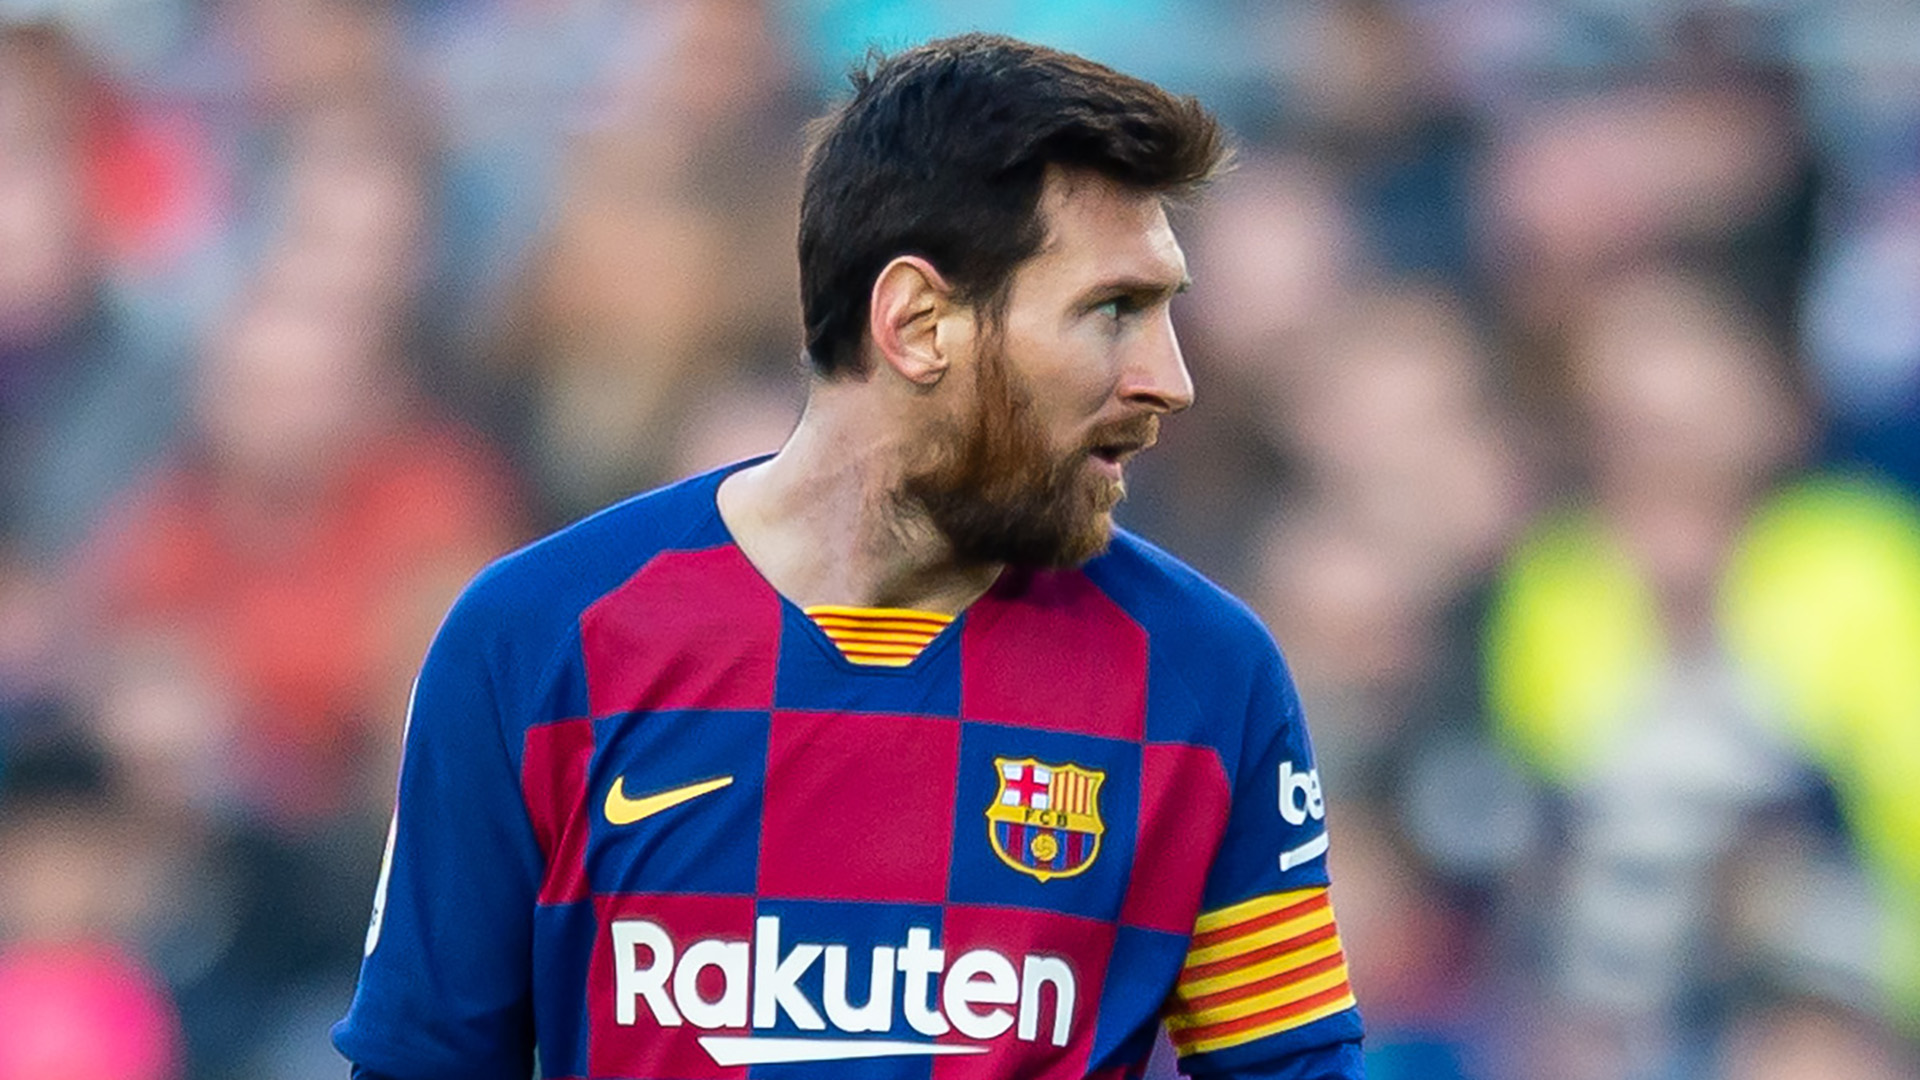 ‘Messi wants a project that allows him to win’ – Barcelona exit call won’t have been easy, says Unzue